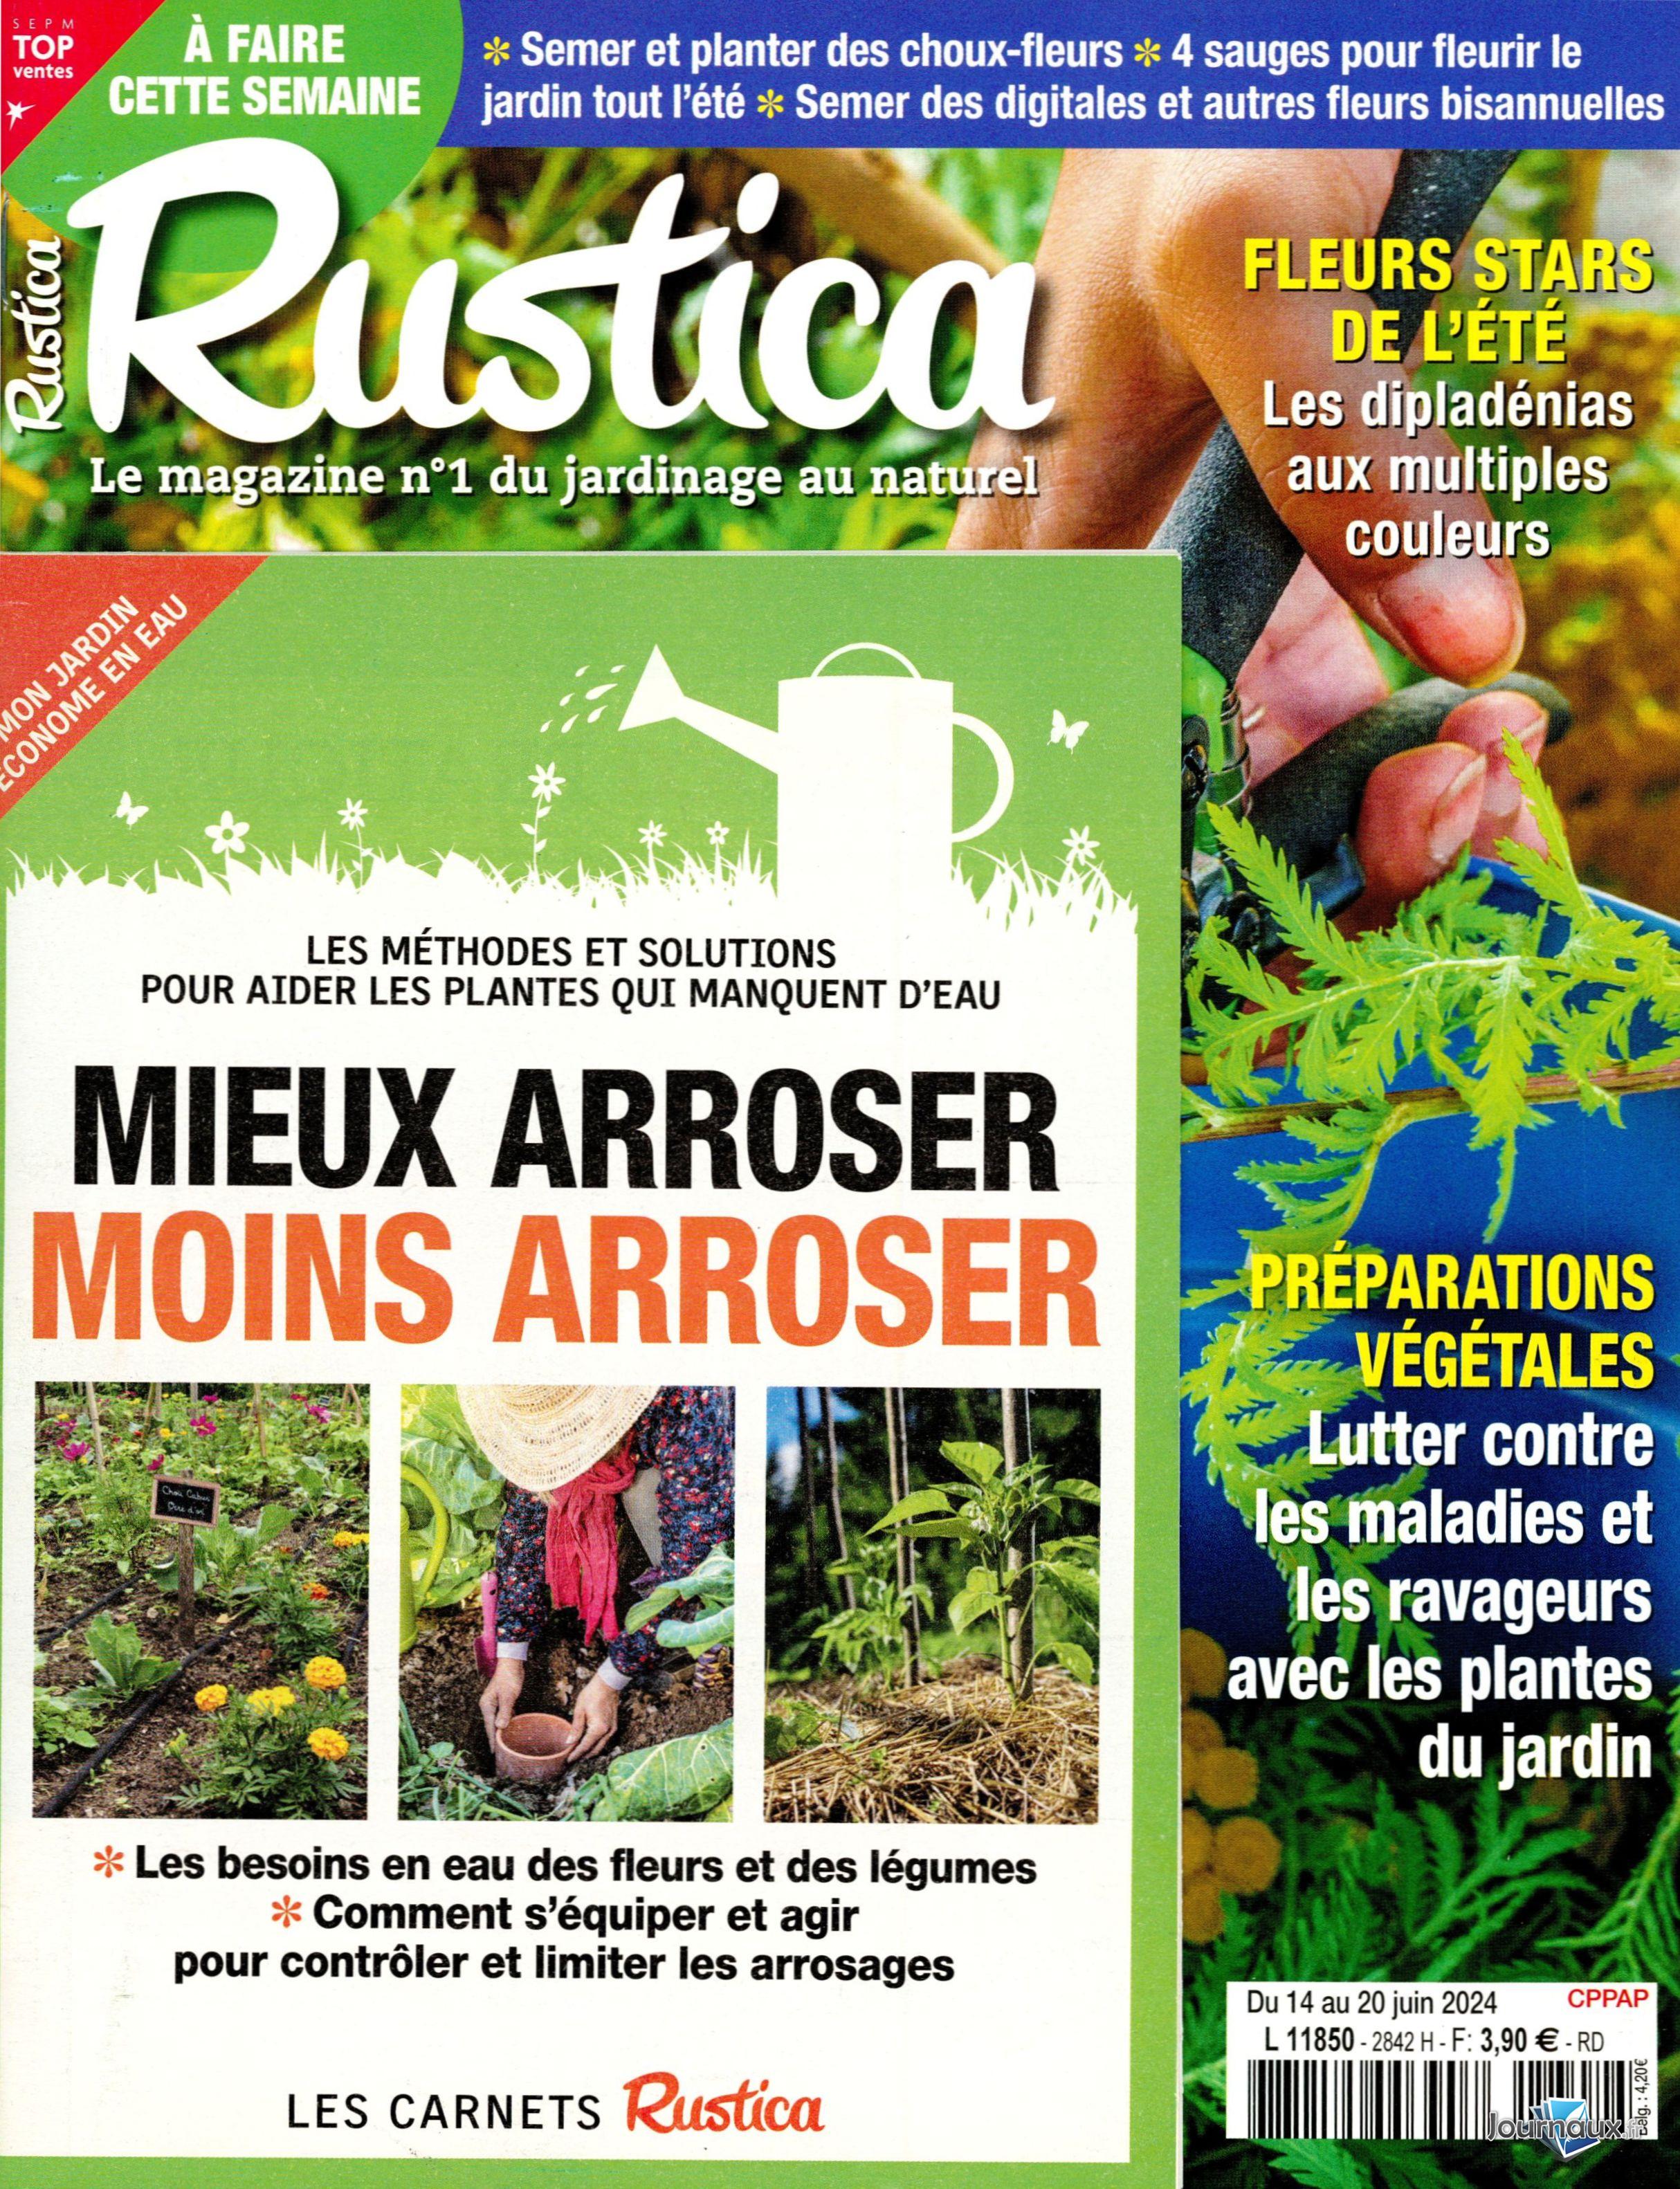 Agenda Jardin 2024 Rustica éditions - 24 pages : Calendriers